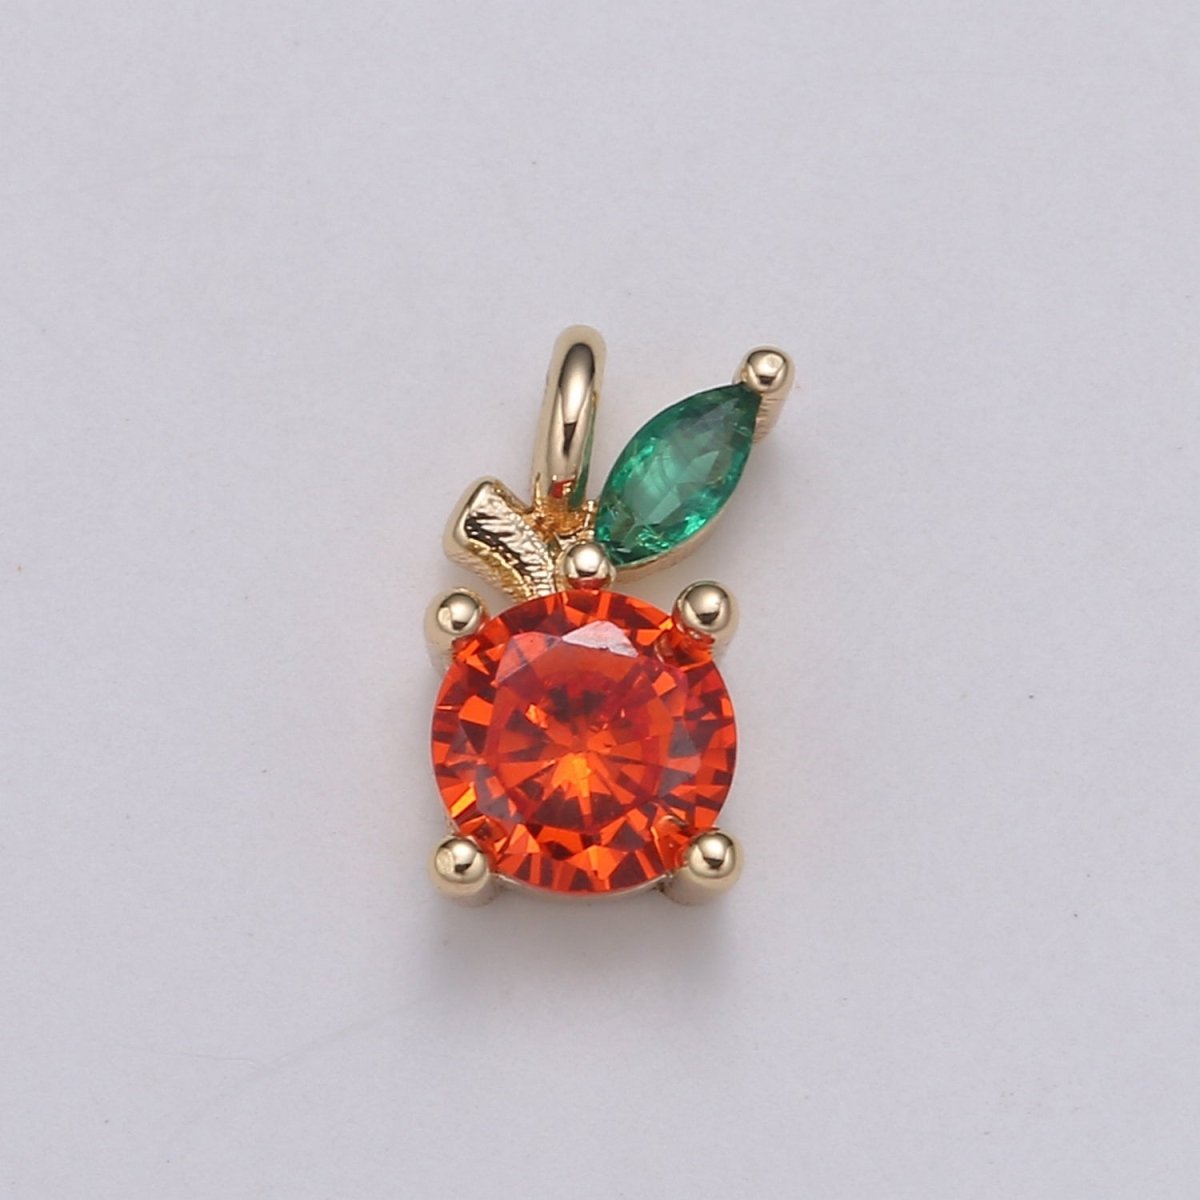 Mini Orange charm 18K Gold filled Fruit charm for Necklace bracelet Earring Component jewelry Making Supply E-181 - DLUXCA